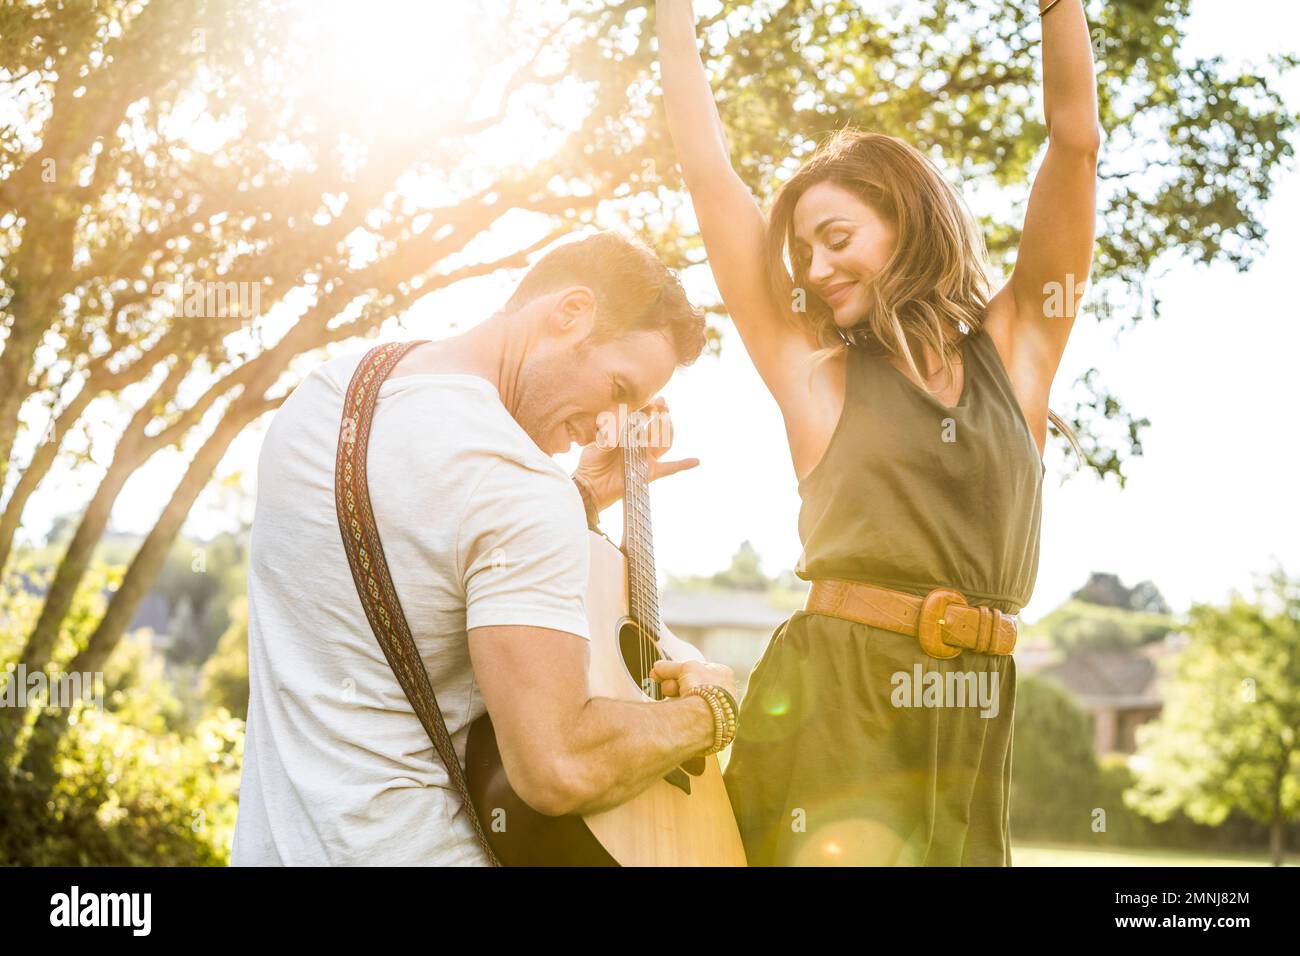 Romantic couple playing guitar and dancing Stock Photo